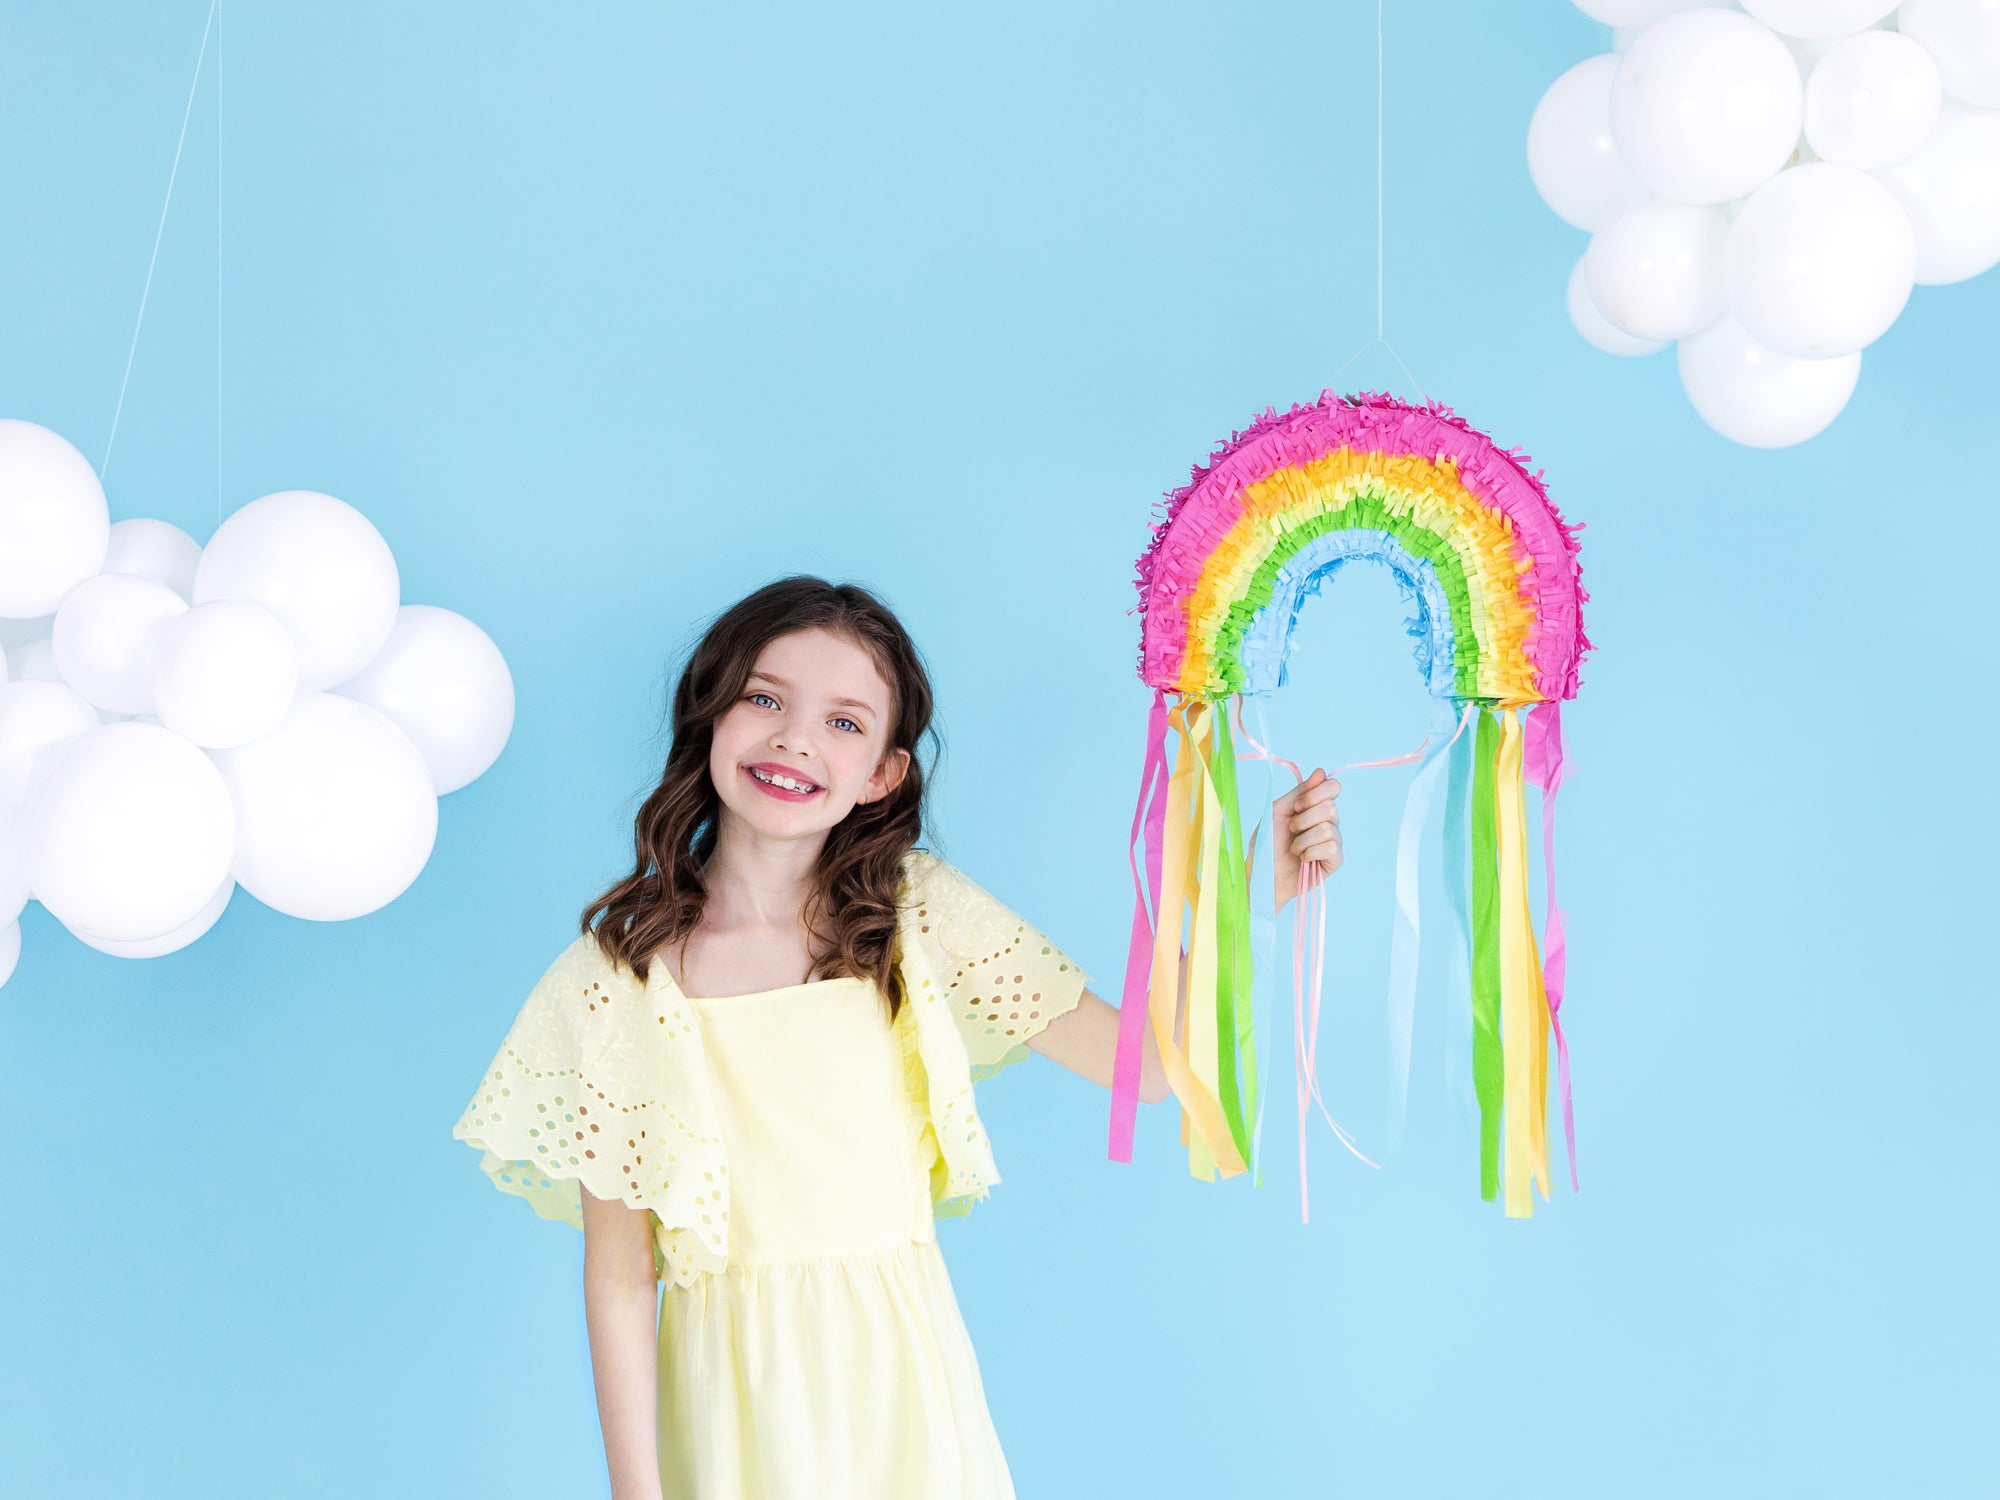 Pull String Rainbow Piñata | The Party Darling